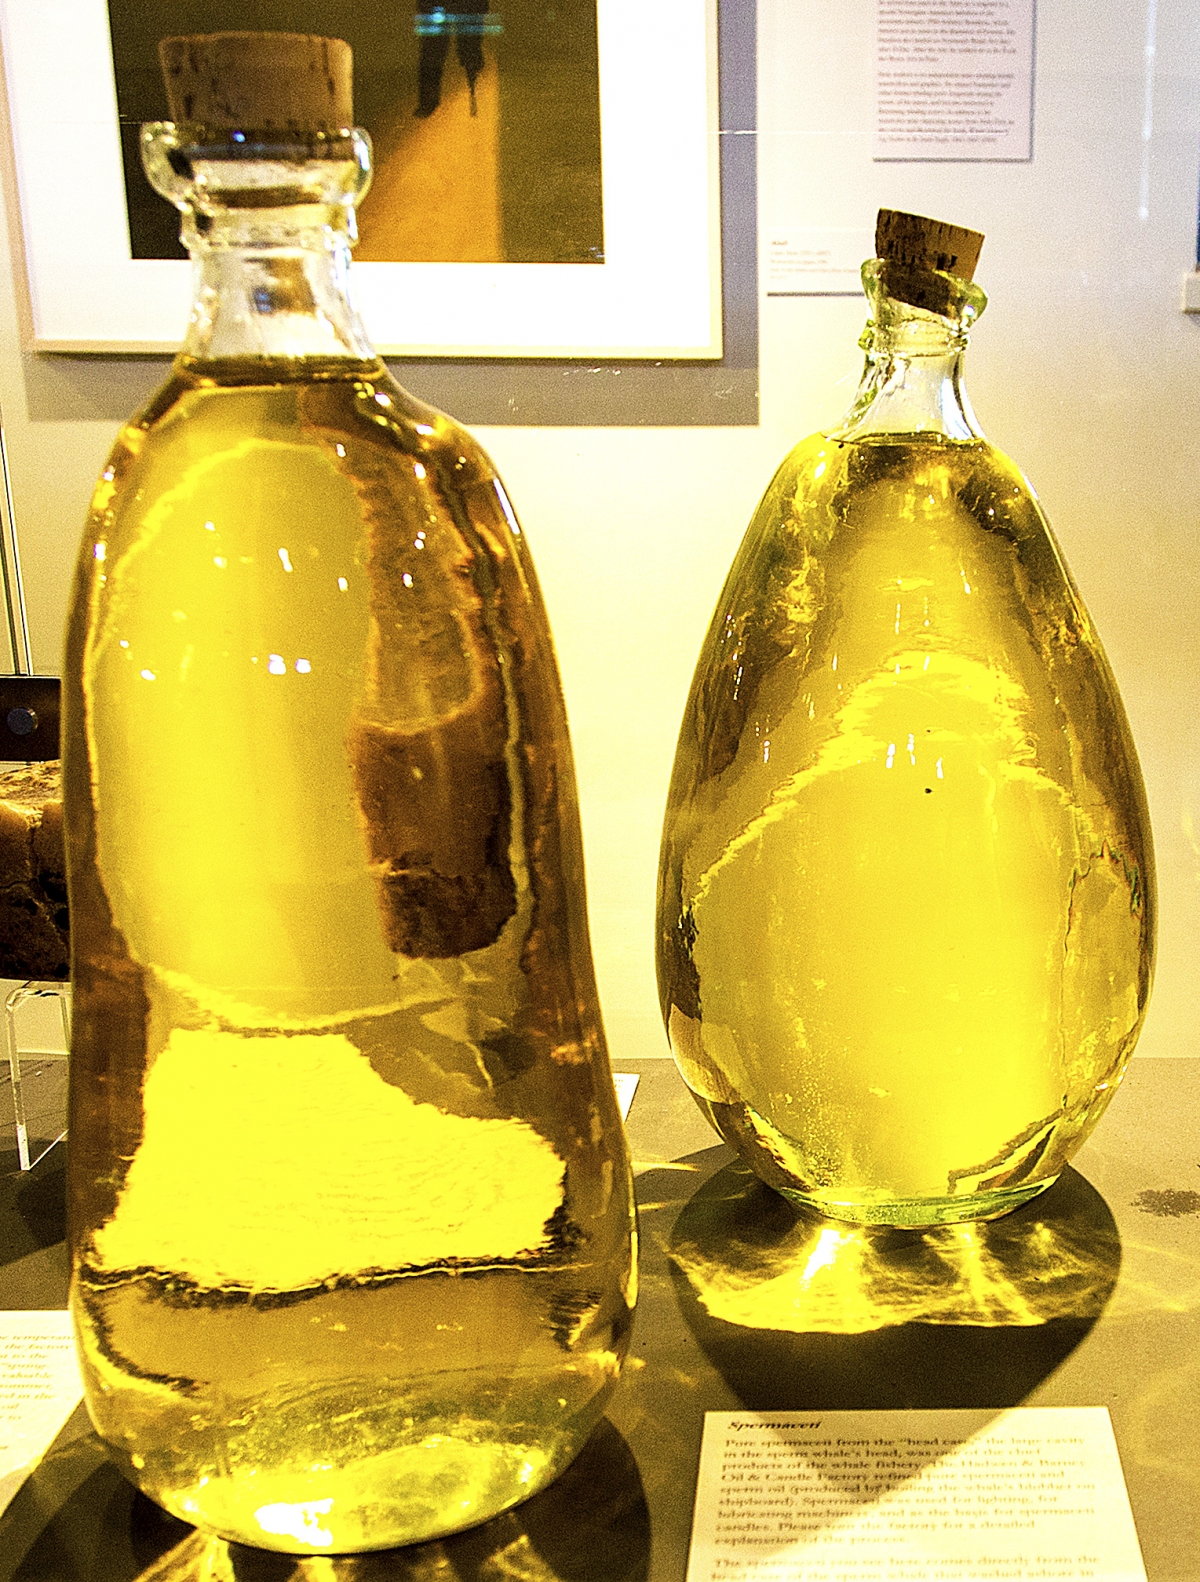 Sperm whale oil flasks from a beached sperm whale in 1998, Nantucket whaling museum